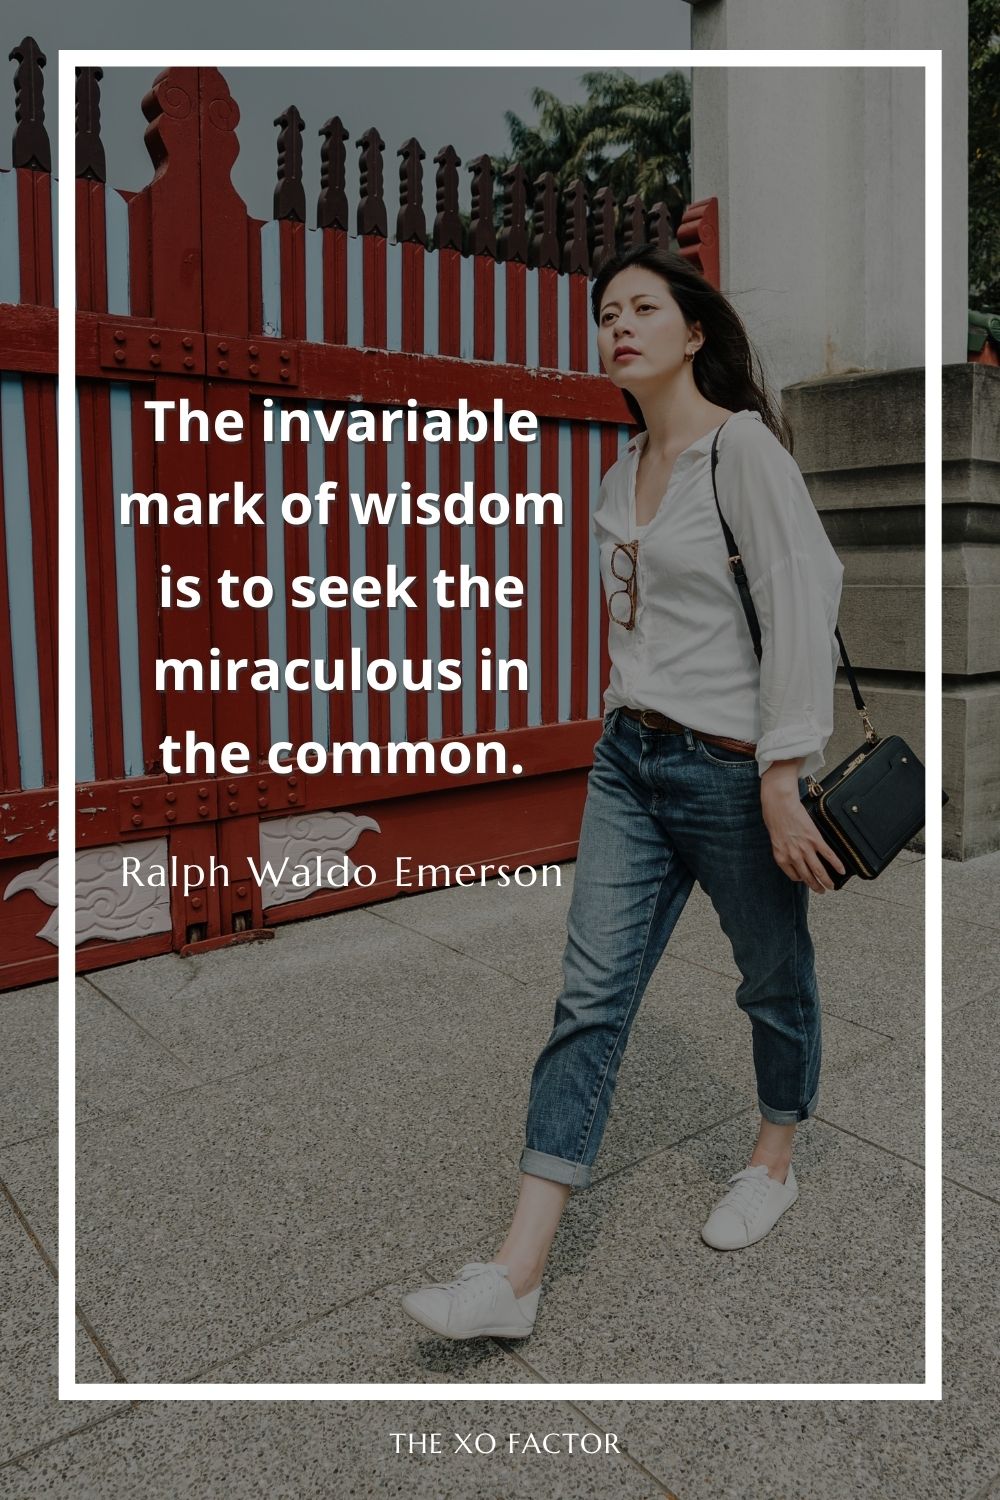 The invariable mark of wisdom is to seek the miraculous in the common.